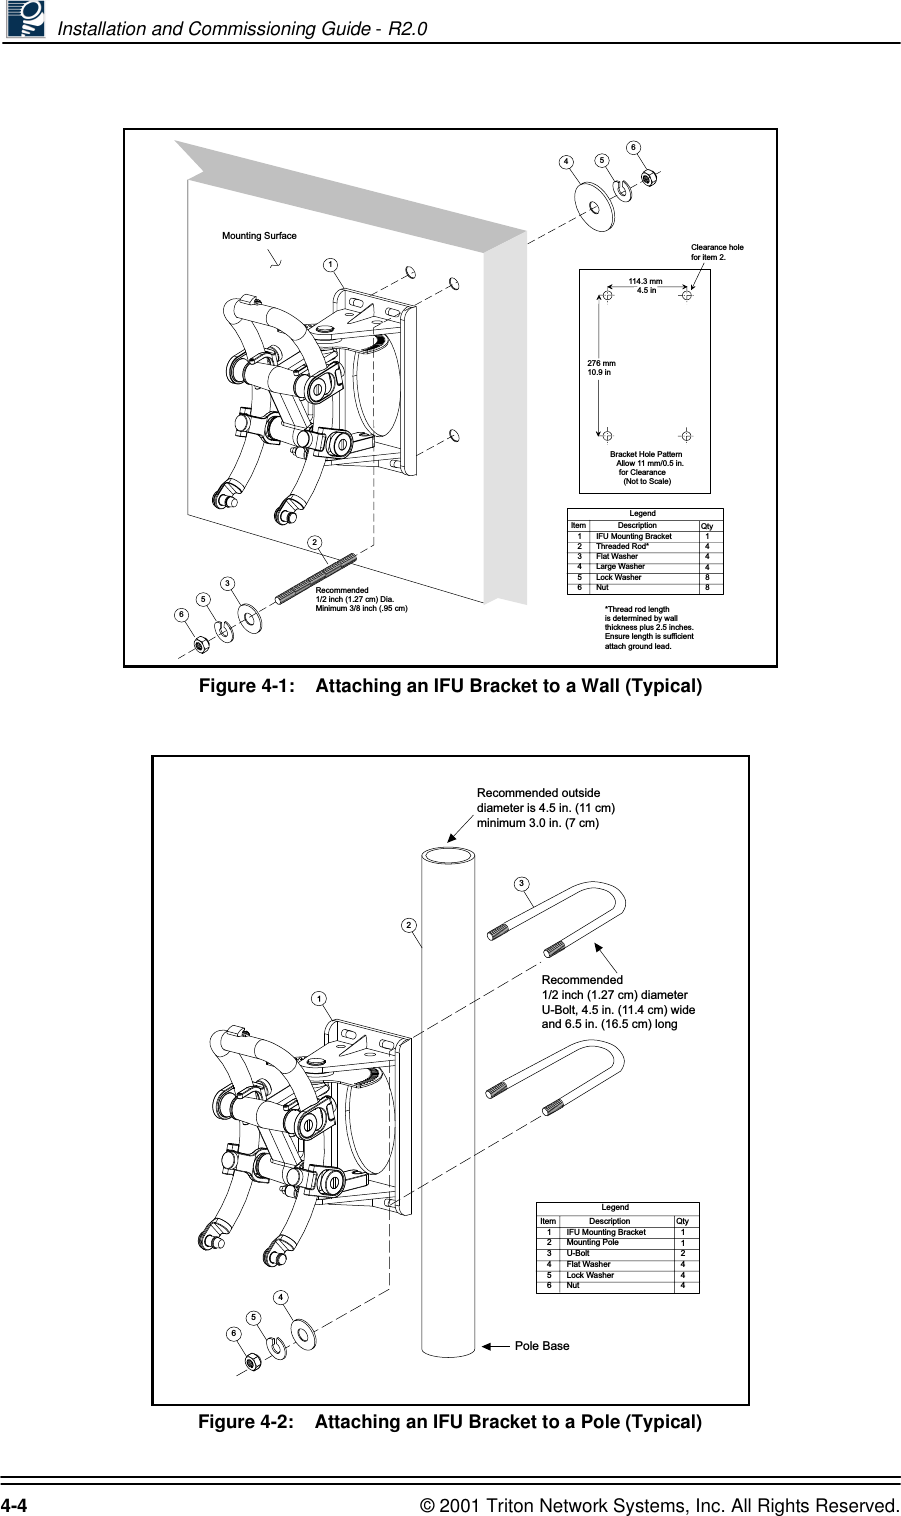  Installation and Commissioning Guide - R2.04-4 © 2001 Triton Network Systems, Inc. All Rights Reserved.Figure 4-1:    Attaching an IFU Bracket to a Wall (Typical)Figure 4-2:    Attaching an IFU Bracket to a Pole (Typical)*Mounting Surface31564562Recommended1/2 inch (1.27 cm) Dia.Minimum 3/8 inch (.95 cm)114.3 mm    4.5 in276 mm10.9 in    Bracket Hole Pattern       Allow 11 mm/0.5 in.         for Clearance          (Not to Scale)LegendItem   1   2   3   4   5   6          DescriptionIFU Mounting BracketThreaded Rod*Flat Washer Large Washer Lock Washer Nut Qty  1  4  4  4  8  8  *Thread rod lengthis determined by wallthickness plus 2.5 inches.Ensure length is sufficientattach ground lead.Clearance holefor item 2.LegendItem   1   2   3   4   5   6             DescriptionIFU Mounting BracketMounting PoleU-Bolt Flat Washer Lock Washer Nut Qty  1  1  2  4  4  4  Recommended1/2 inch (1.27 cm) diameterU-Bolt, 4.5 in. (11.4 cm) wideand 6.5 in. (16.5 cm) longRecommended outsidediameter is 4.5 in. (11 cm)minimum 3.0 in. (7 cm)Pole Base45632 